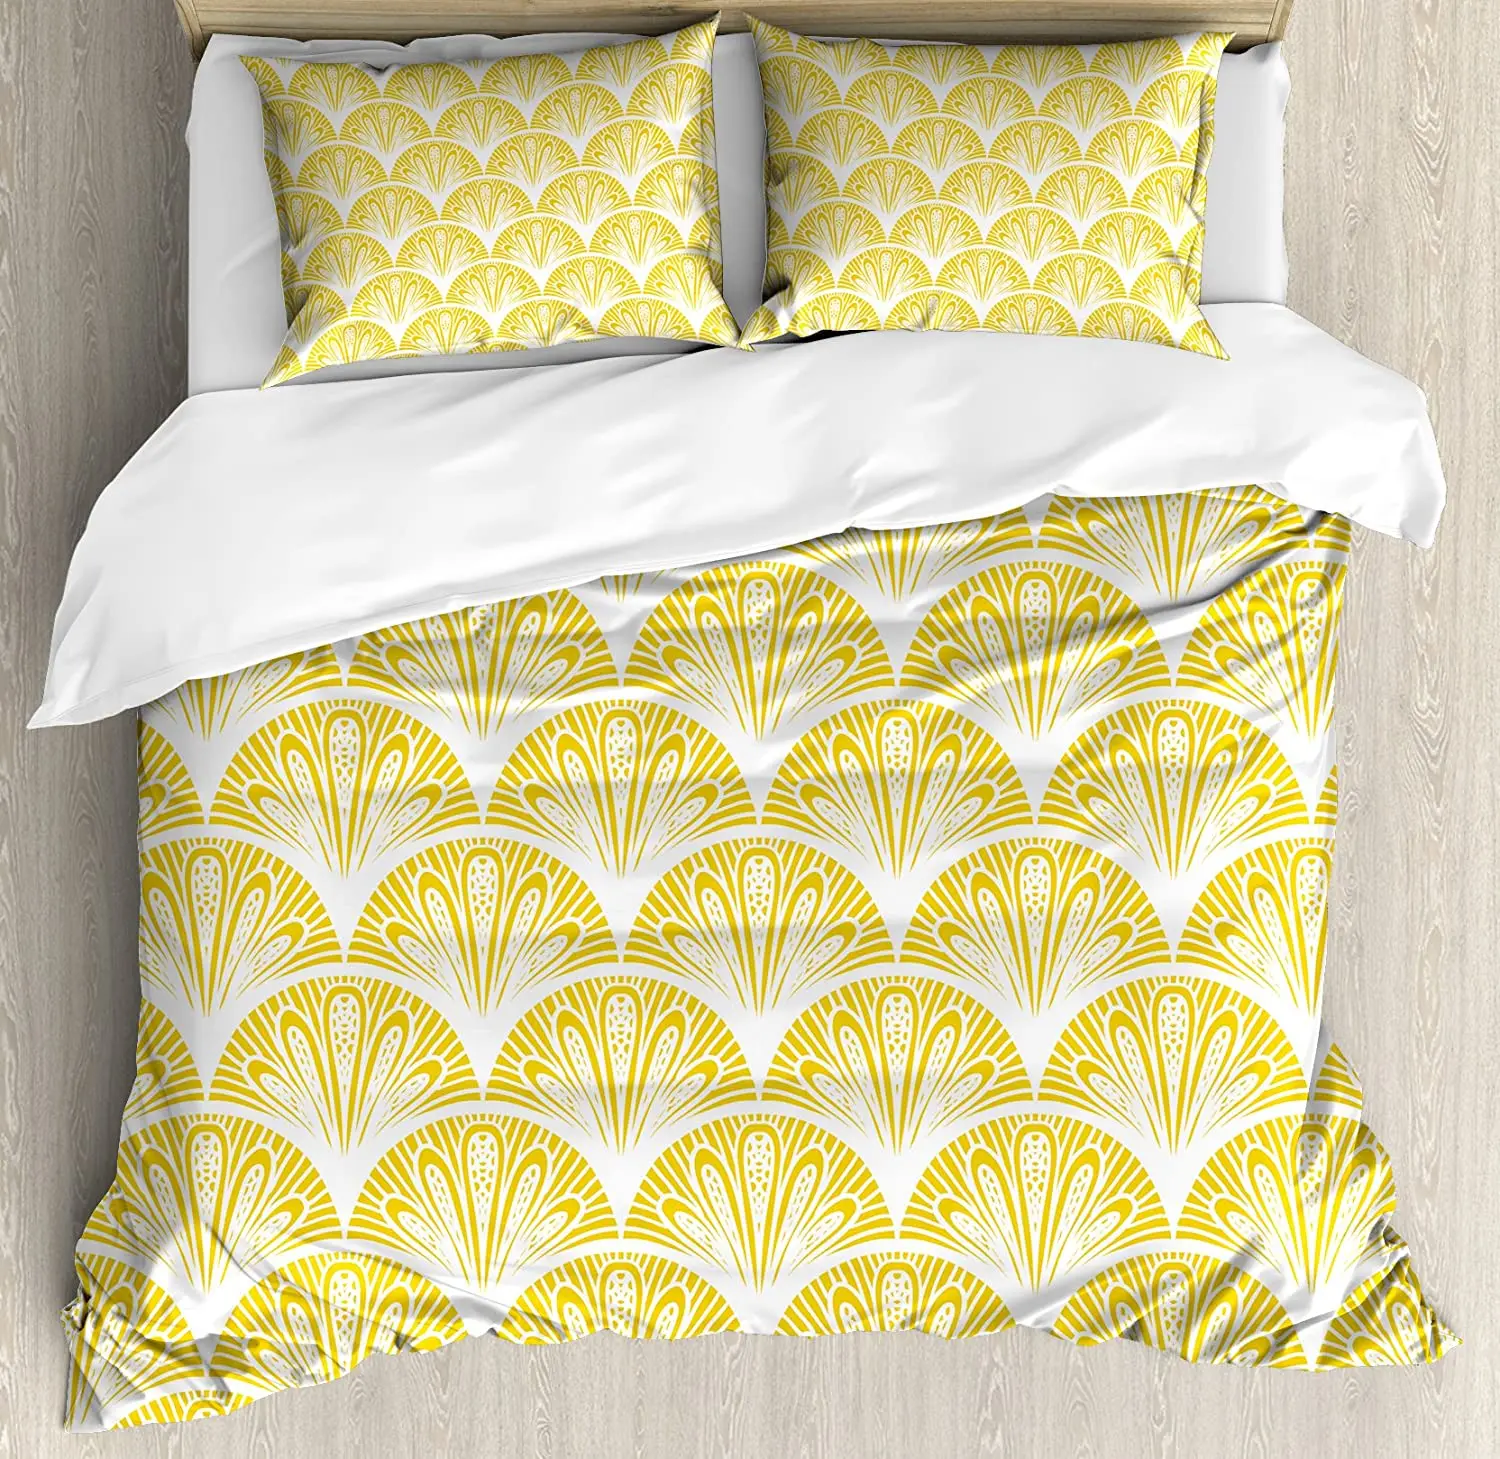 

Yellow and White 3pcs Bedding Set Rounded Floral Motifs Overlapp Duvet Cover Set Bed Set Quilt Cover Pillow Case Comforter Cover